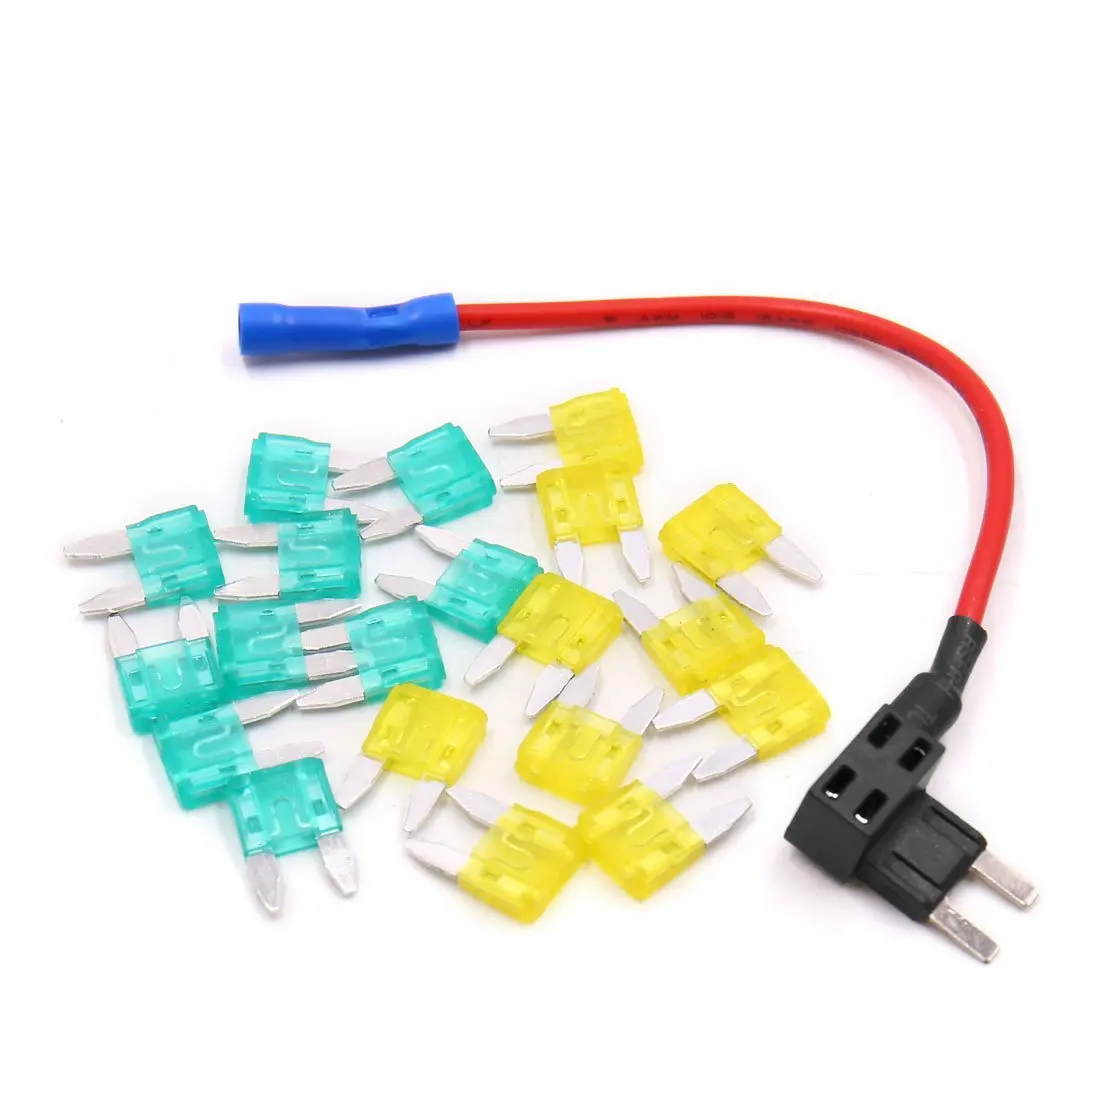 Cheap 15 Amp Fuse Tap, find 15 Amp Fuse Tap deals on line at Alibaba.com